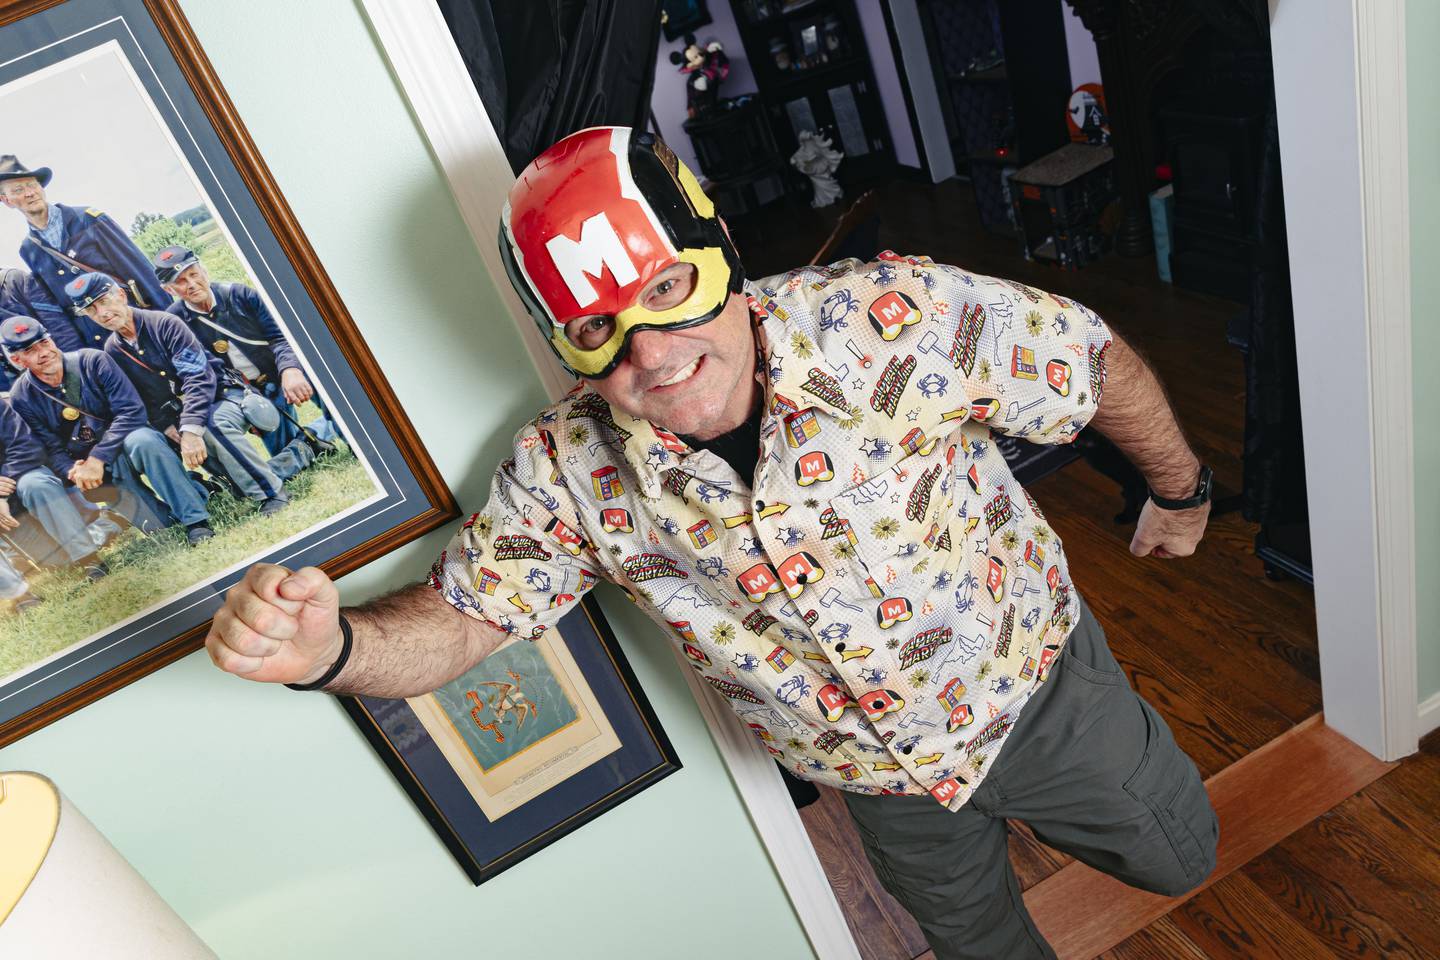 Clark Oliver, also known as Captain Maryland, wears his alter ego’s helmet surrounded by memorabilia from decades of being a costume and sci-fi enthusiast at his home on Wednesday, Dec. 6, 2023. (Wesley Lapointe/for The Baltimore Banner)